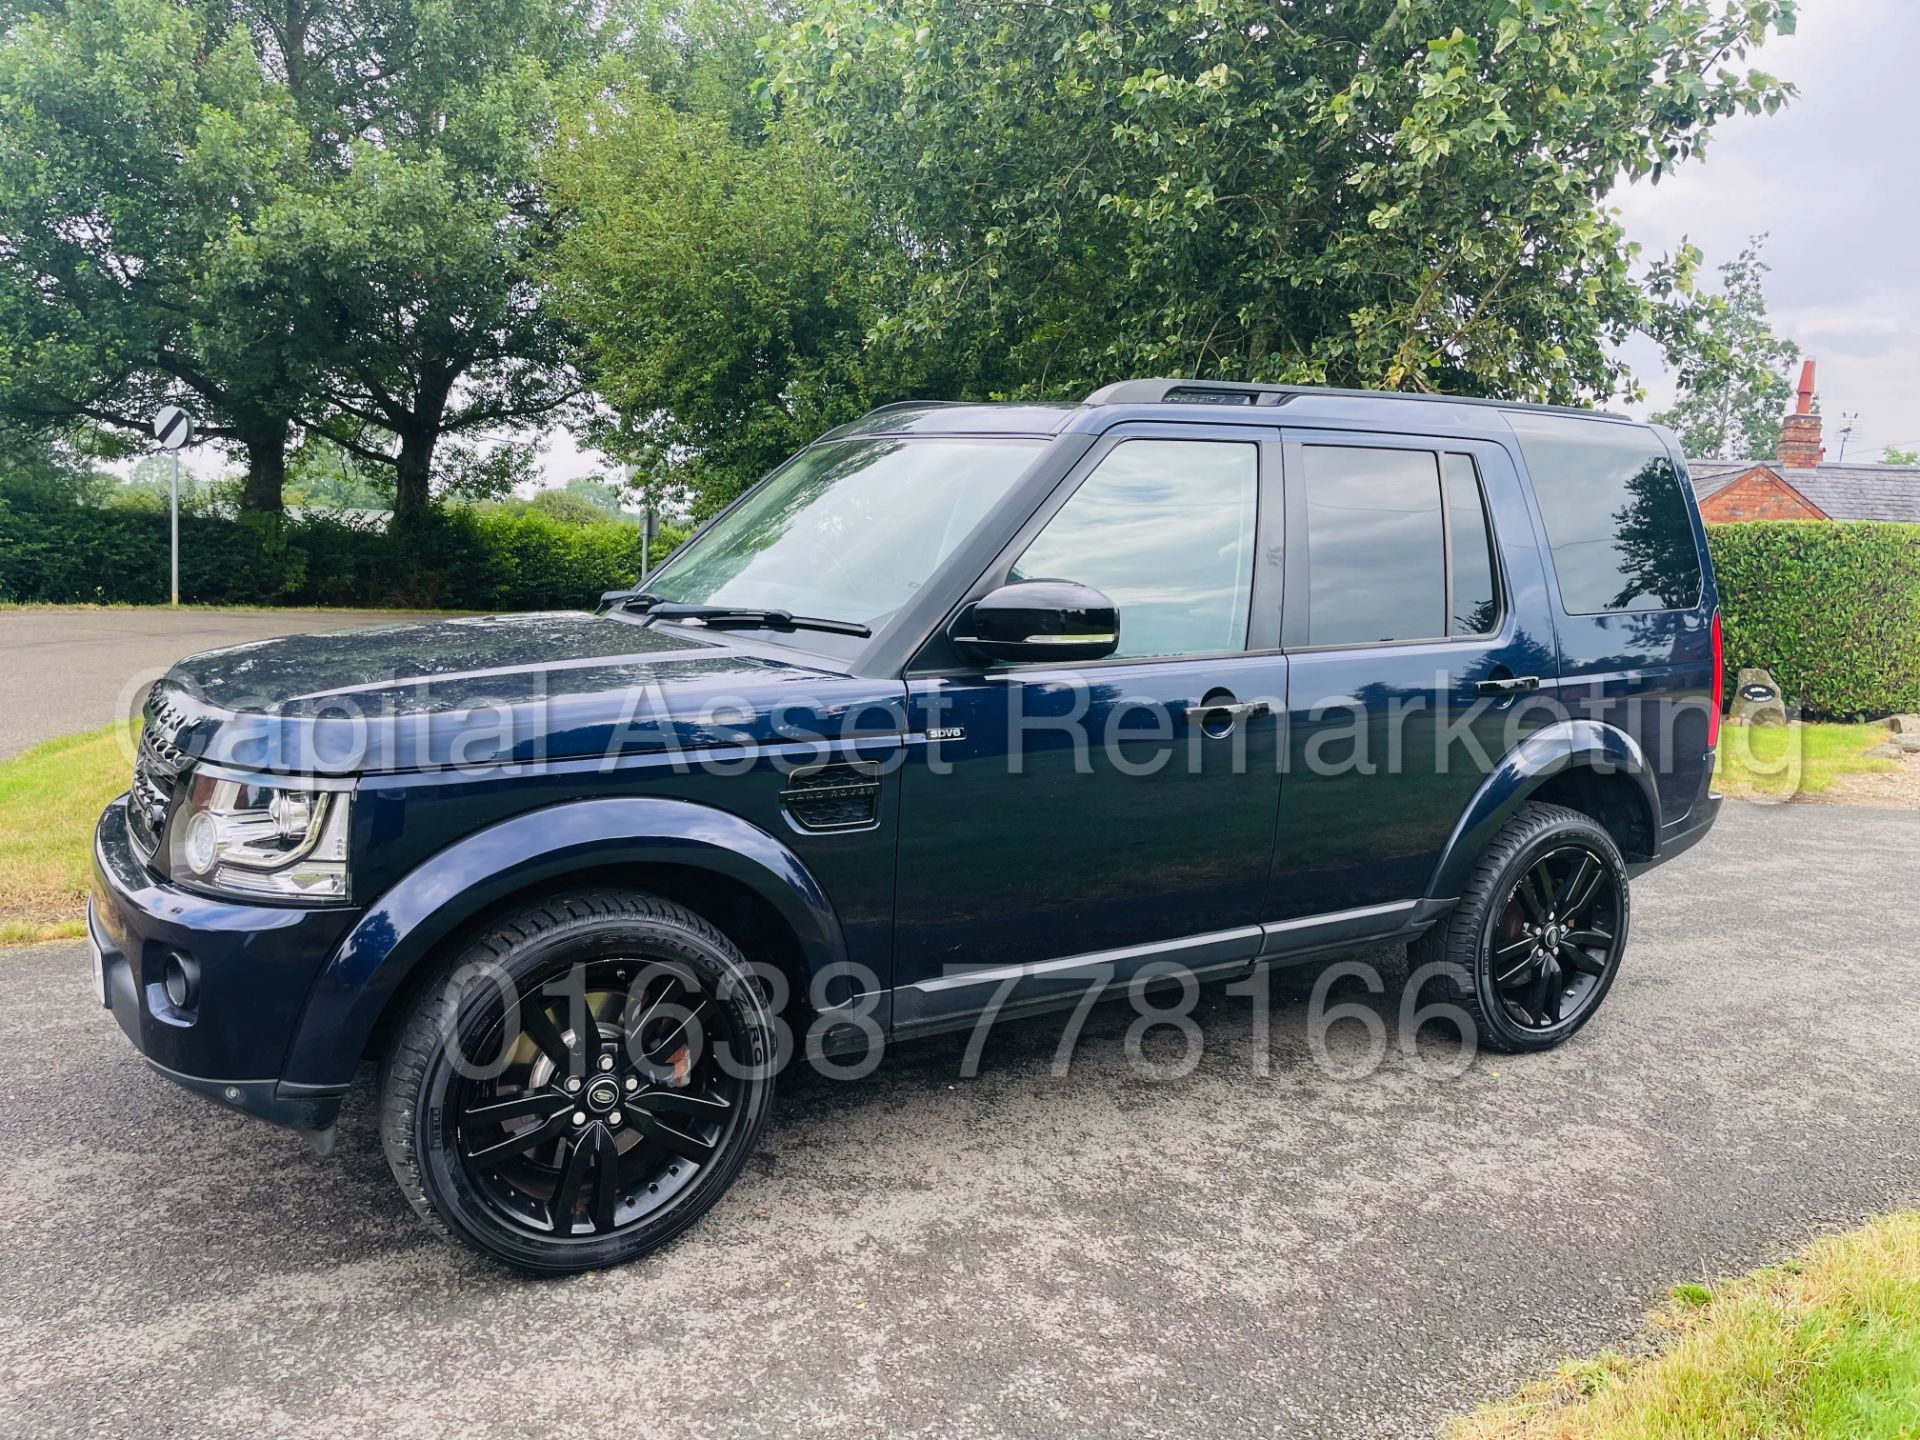 LAND ROVER DISCOVERY 4 *HSE* 7 SEATER SUV (2014 - NEW MODEL) '3.0 SDV6 - 255 BHP - 8 SPEED AUTO'